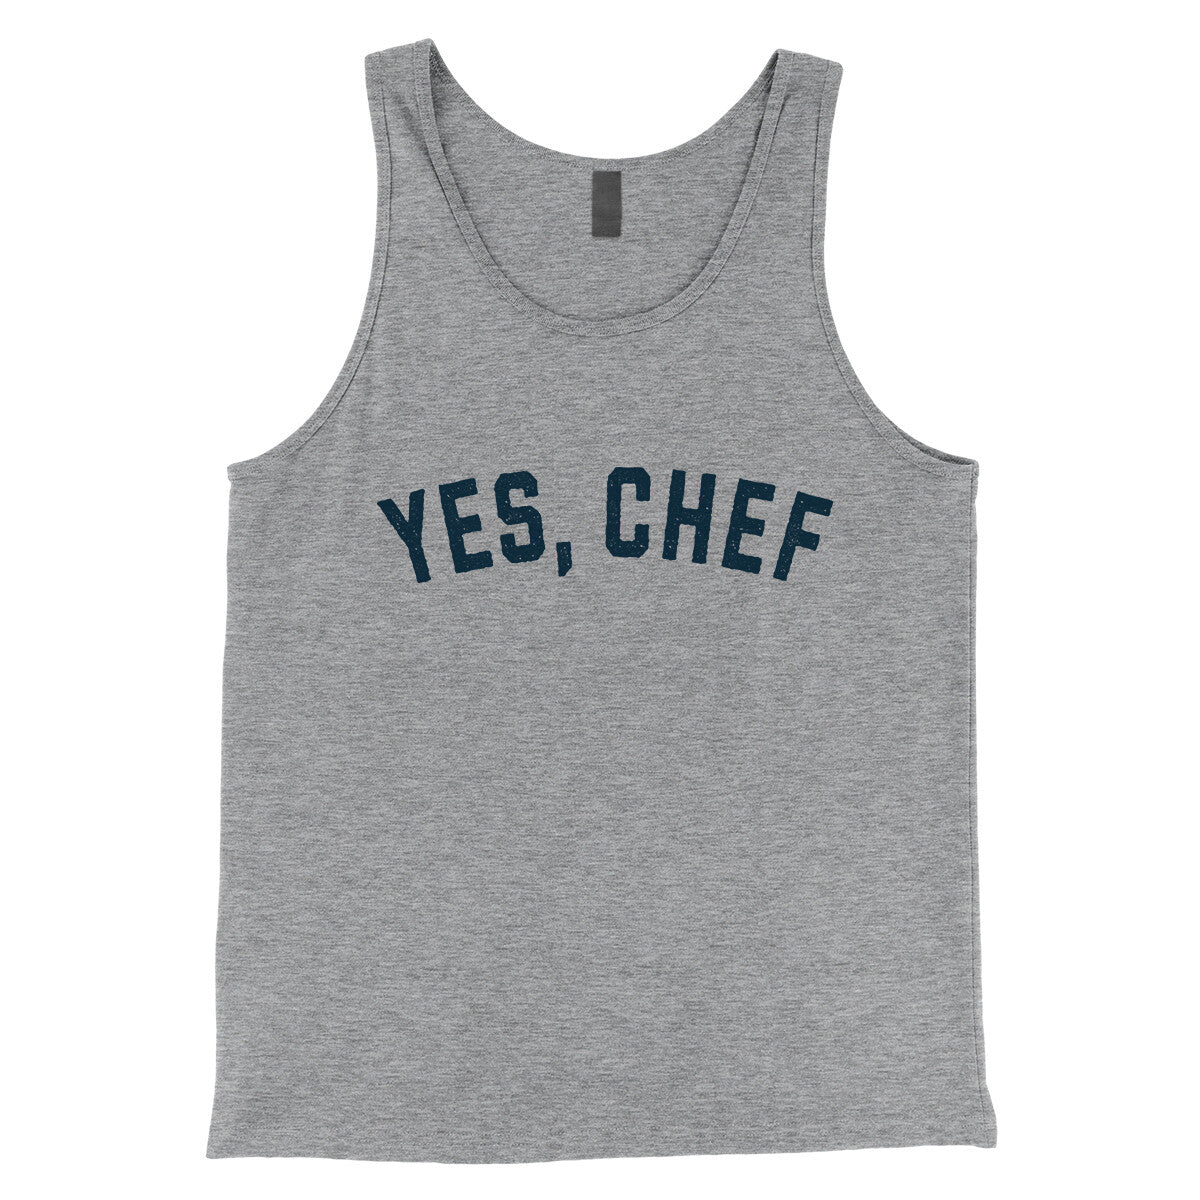 Yes Chef in Athletic Heather Color